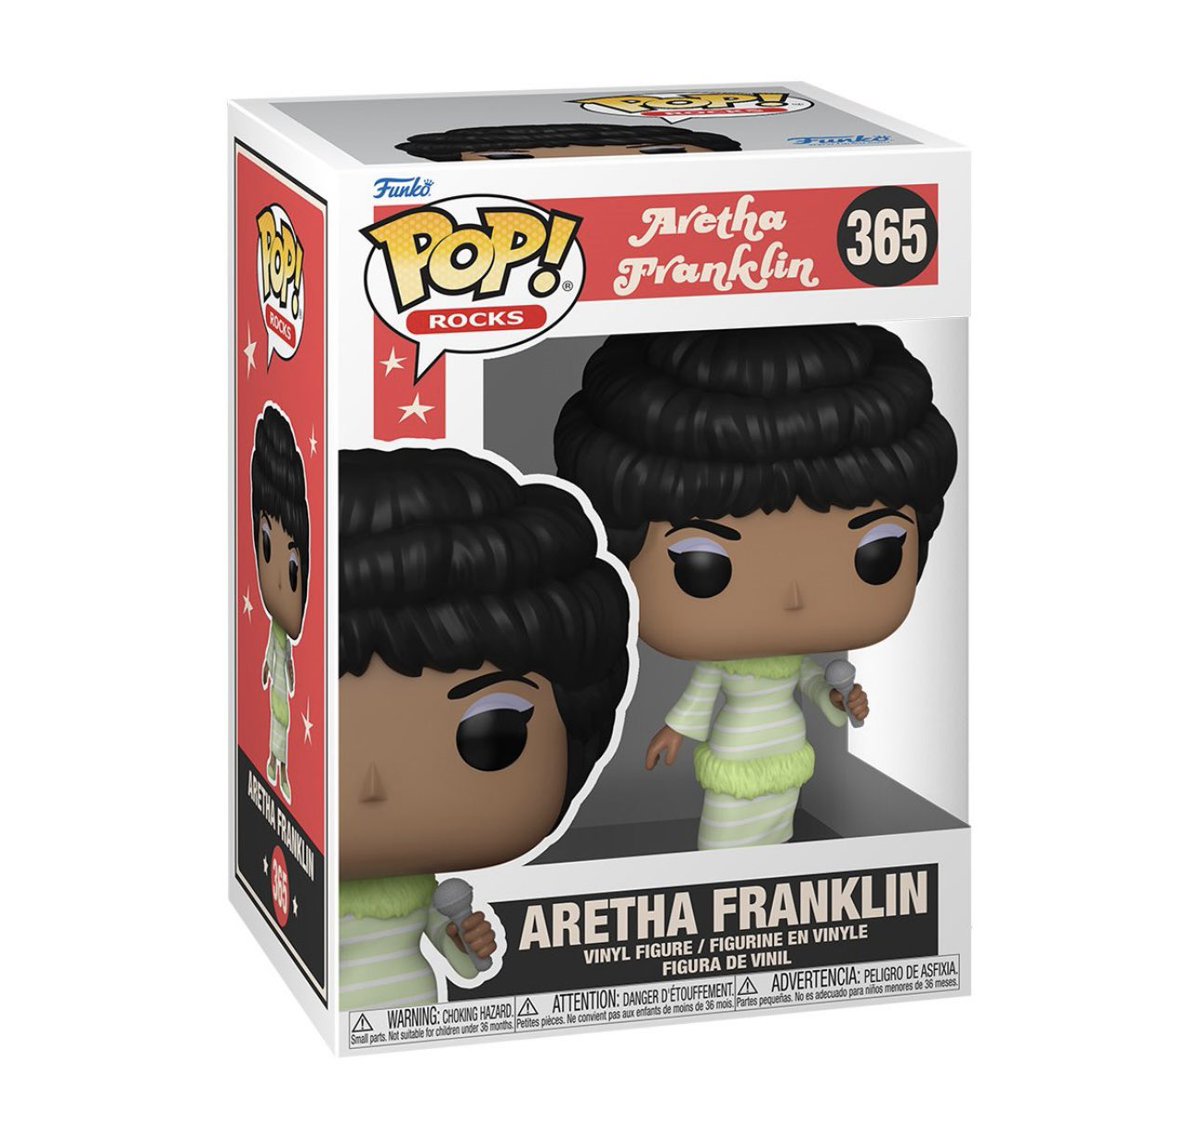 Preorder Now: Aretha Franklin at Entertainment Earth!
#Ad #ArethaFranklin #Funko
.
entertainmentearth.com/product/fu6745…